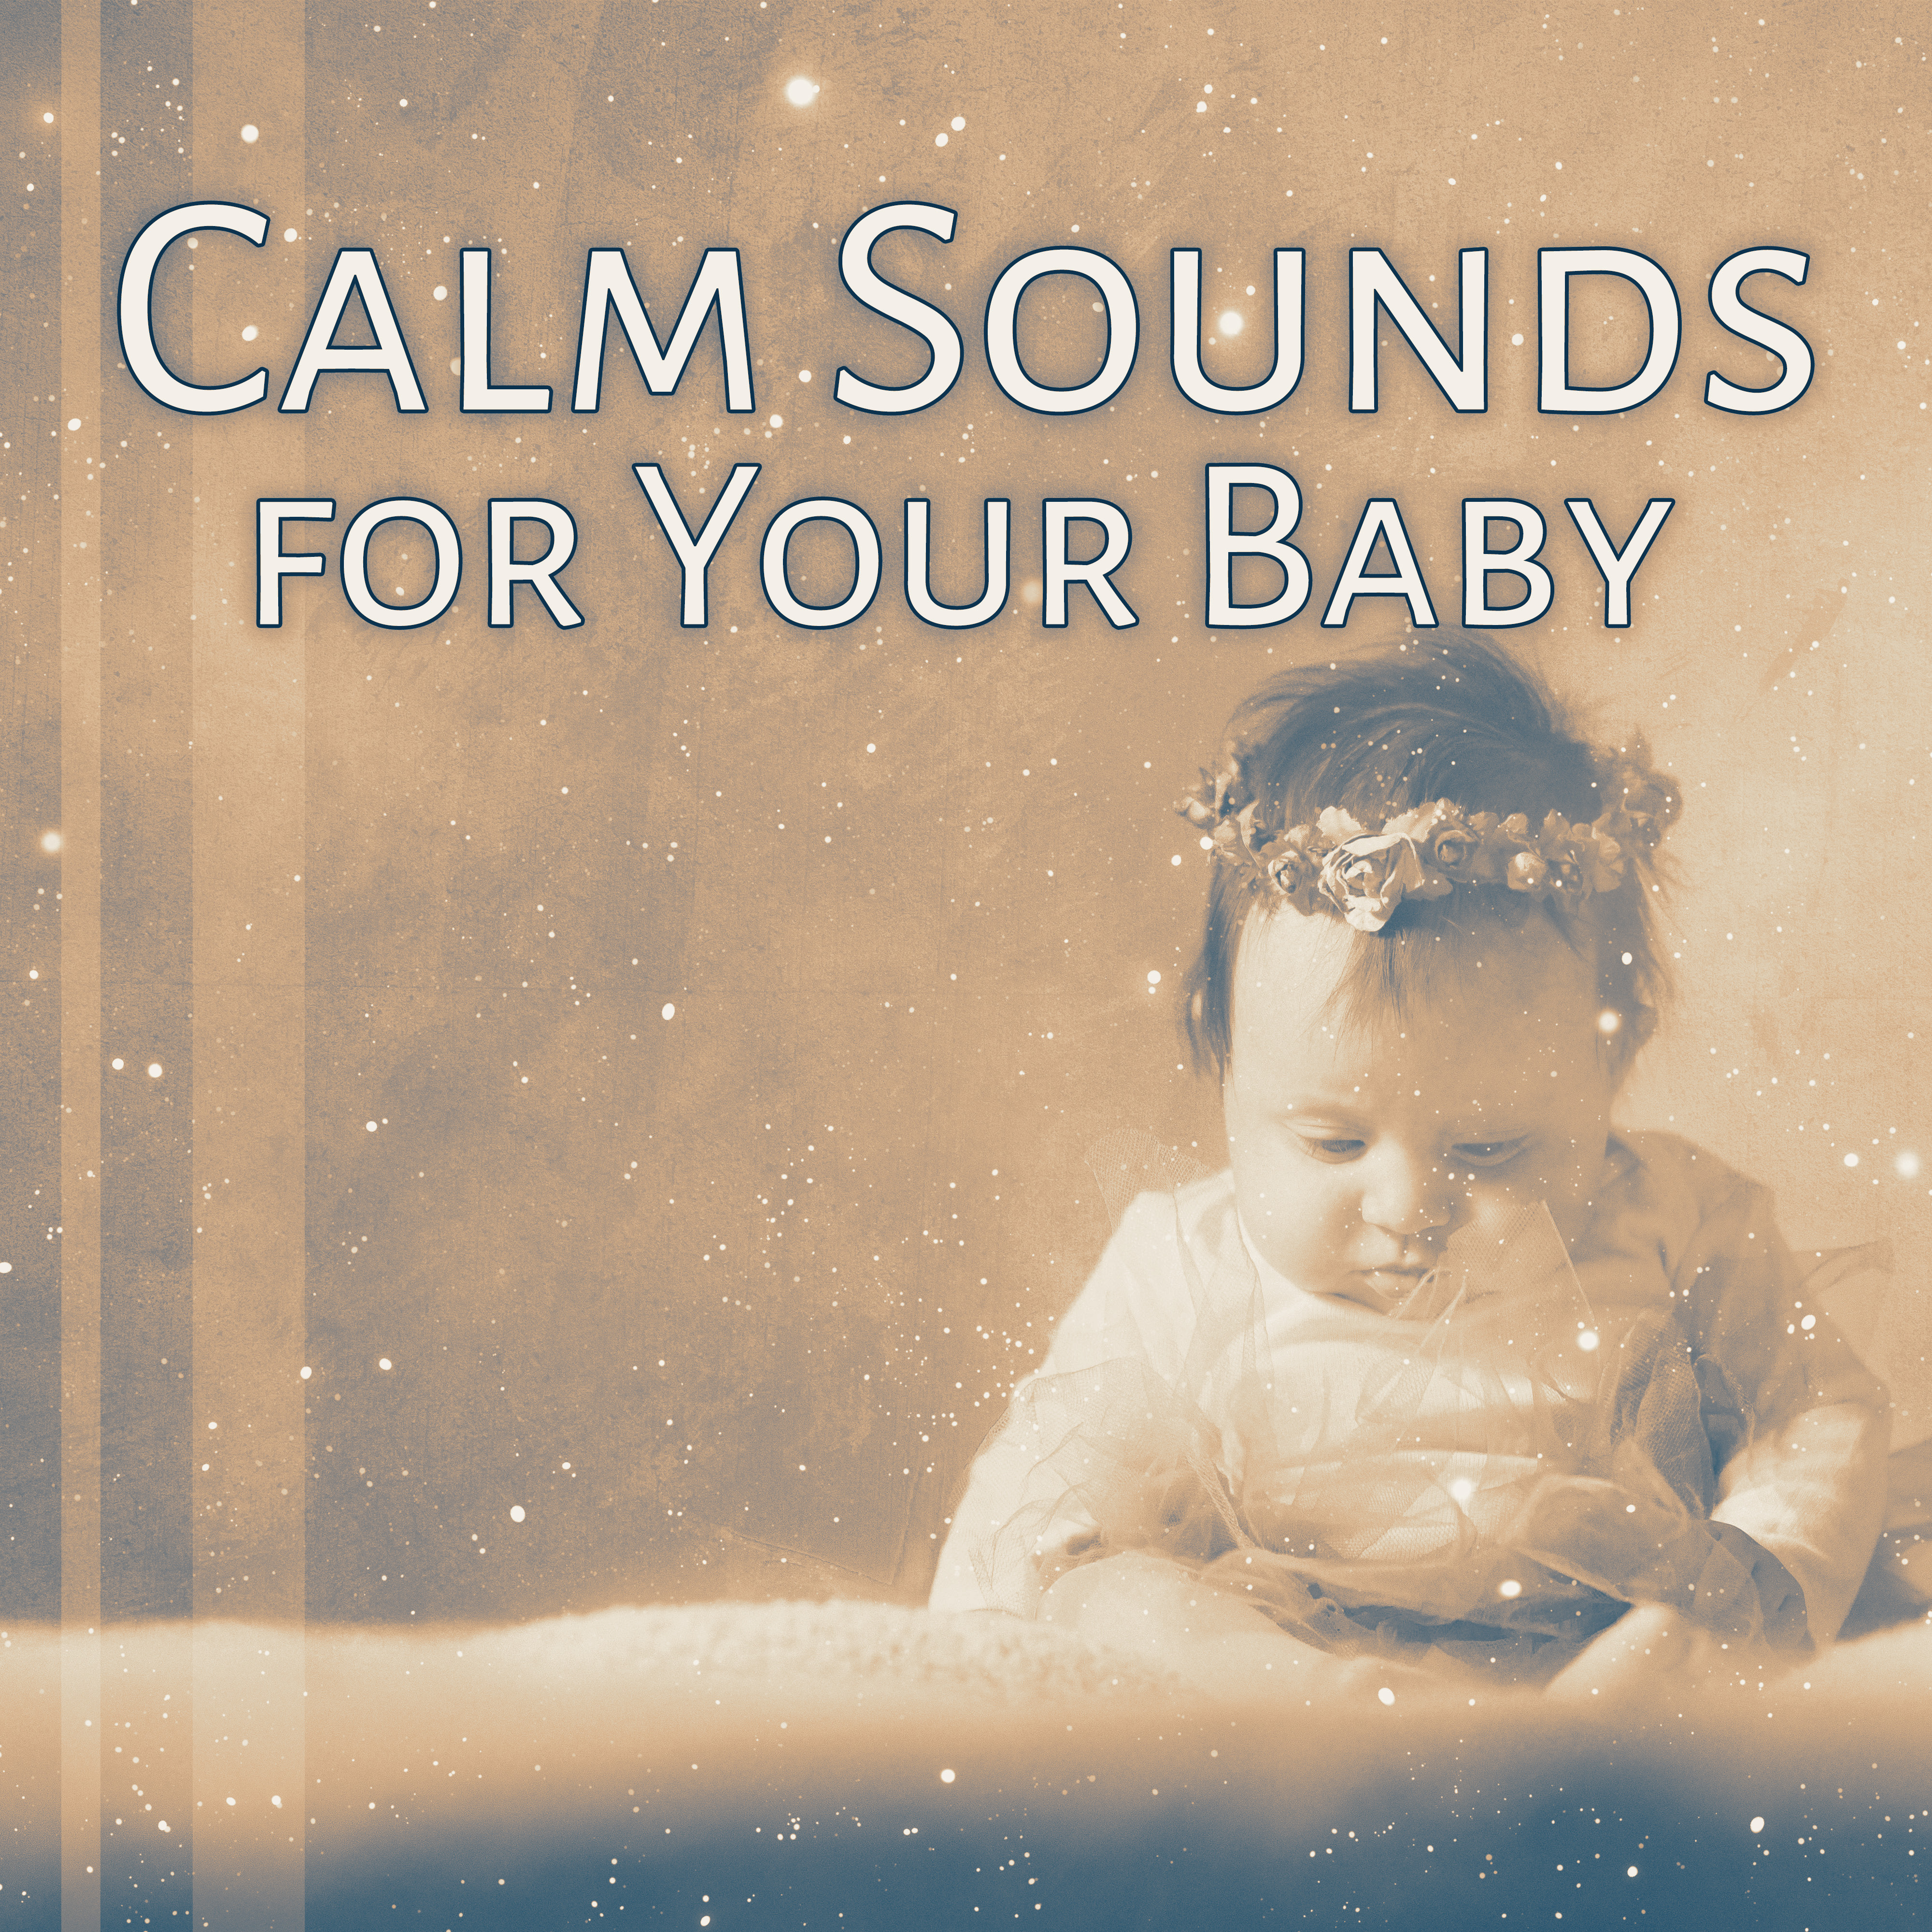 Calm Sounds for Your Baby – Chilled Sounds, Sleep All Night, Calm Evening, New Age Lullabies